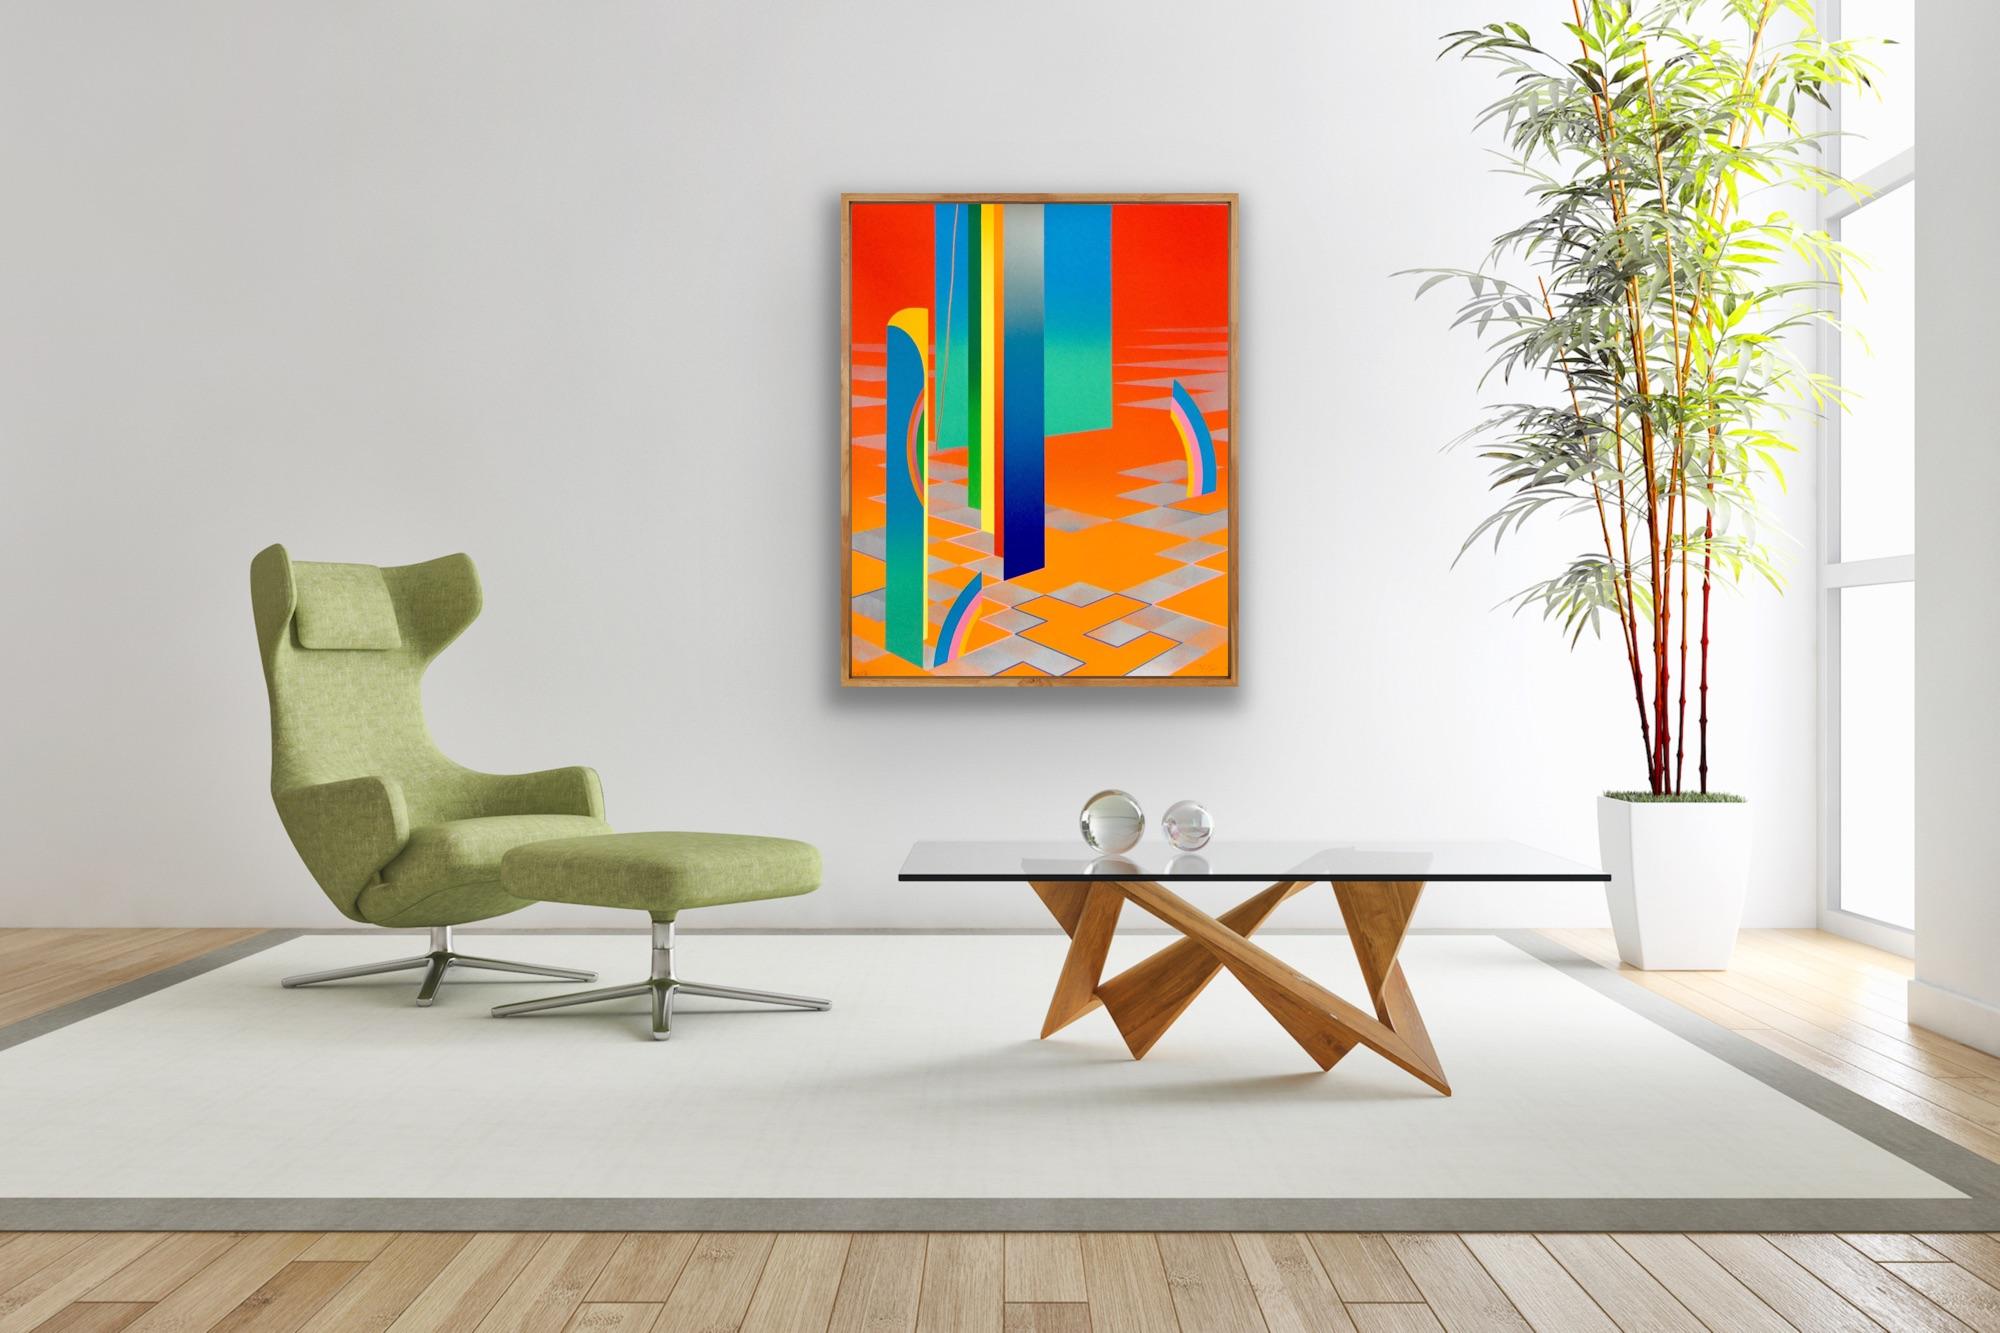 Collectors Limited Edition 1980's warm colourful abstract geometric graphic 2 For Sale 1